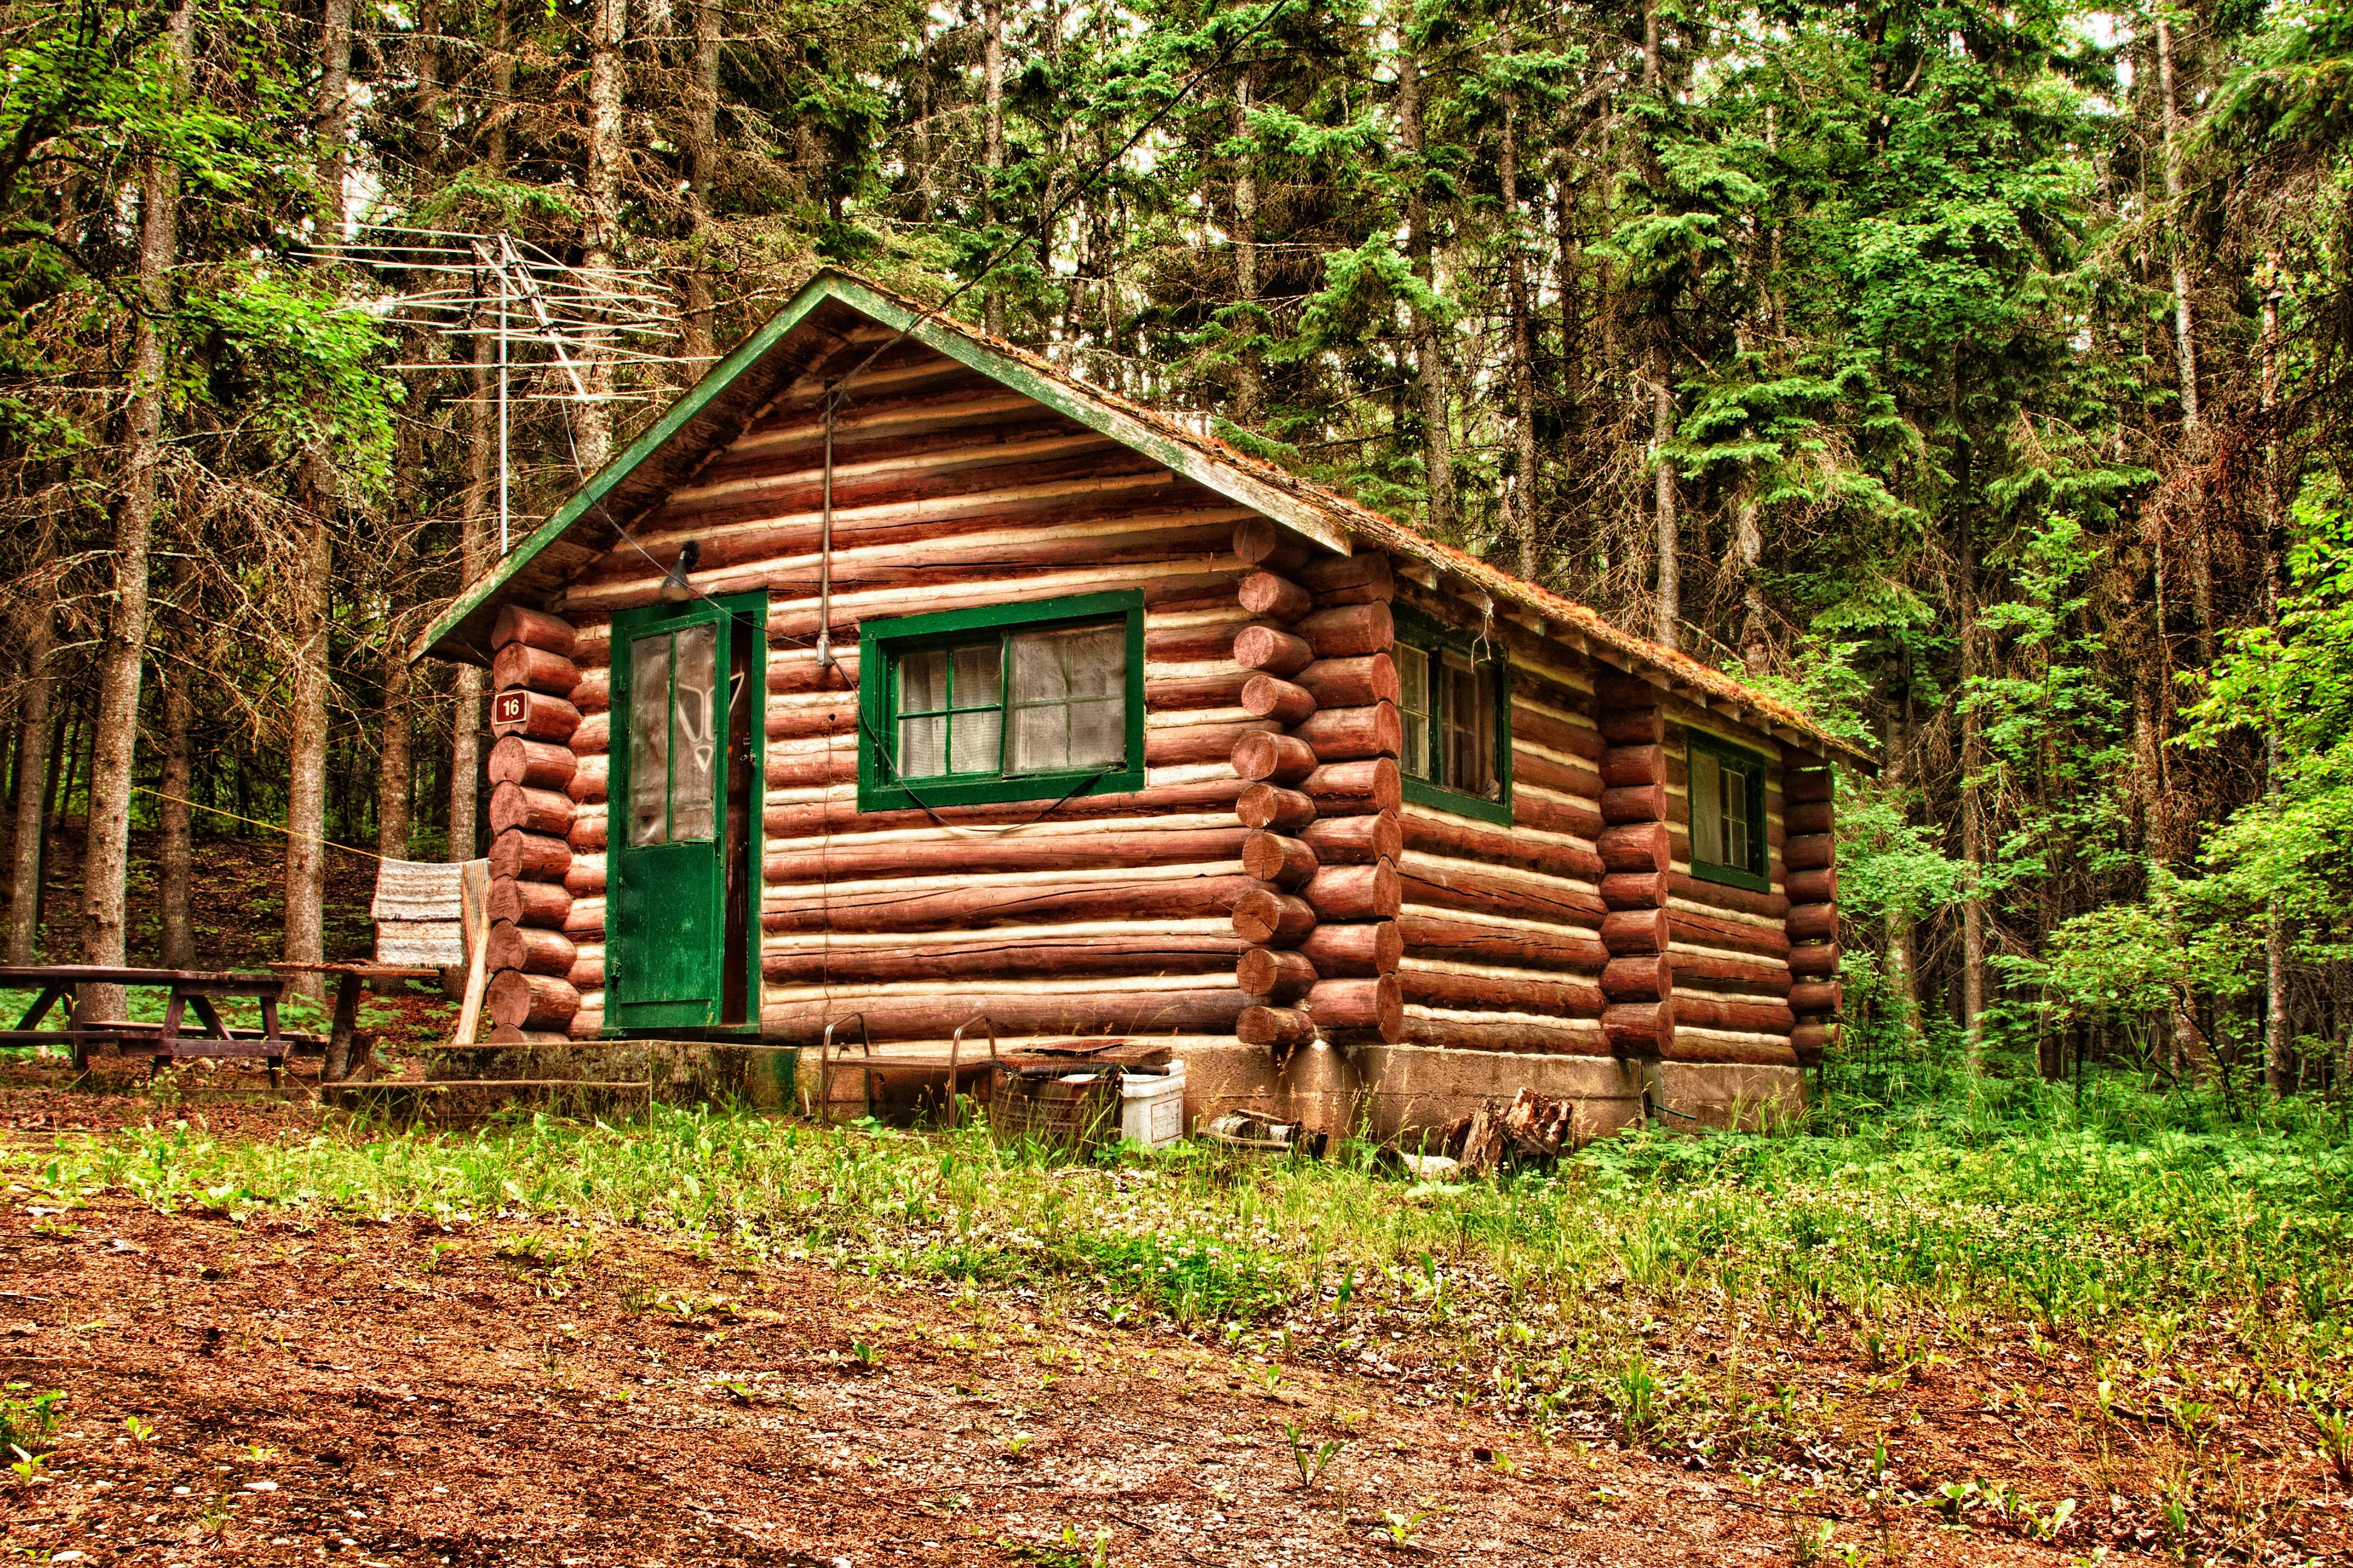 What Most People Want in a Log Cabin